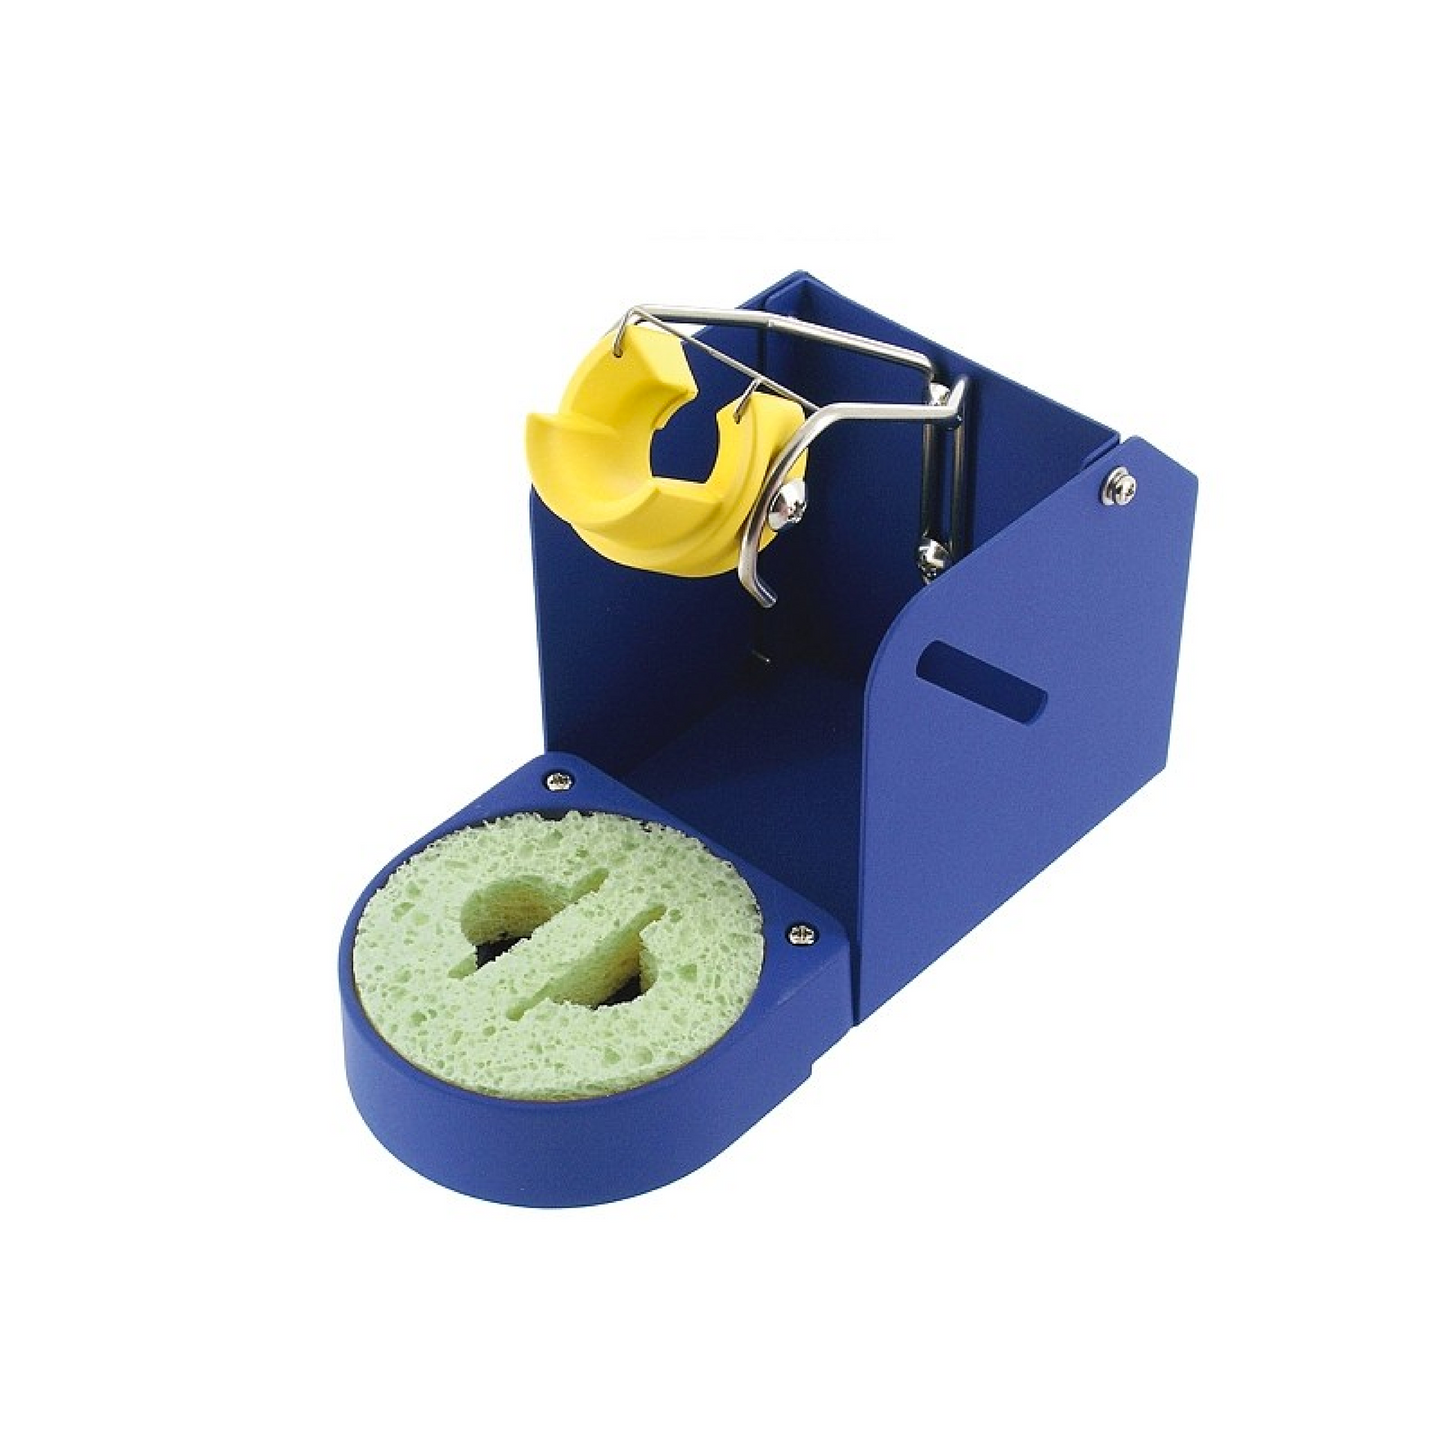 FH200-02 Iron Holder with Cleaning Sponge